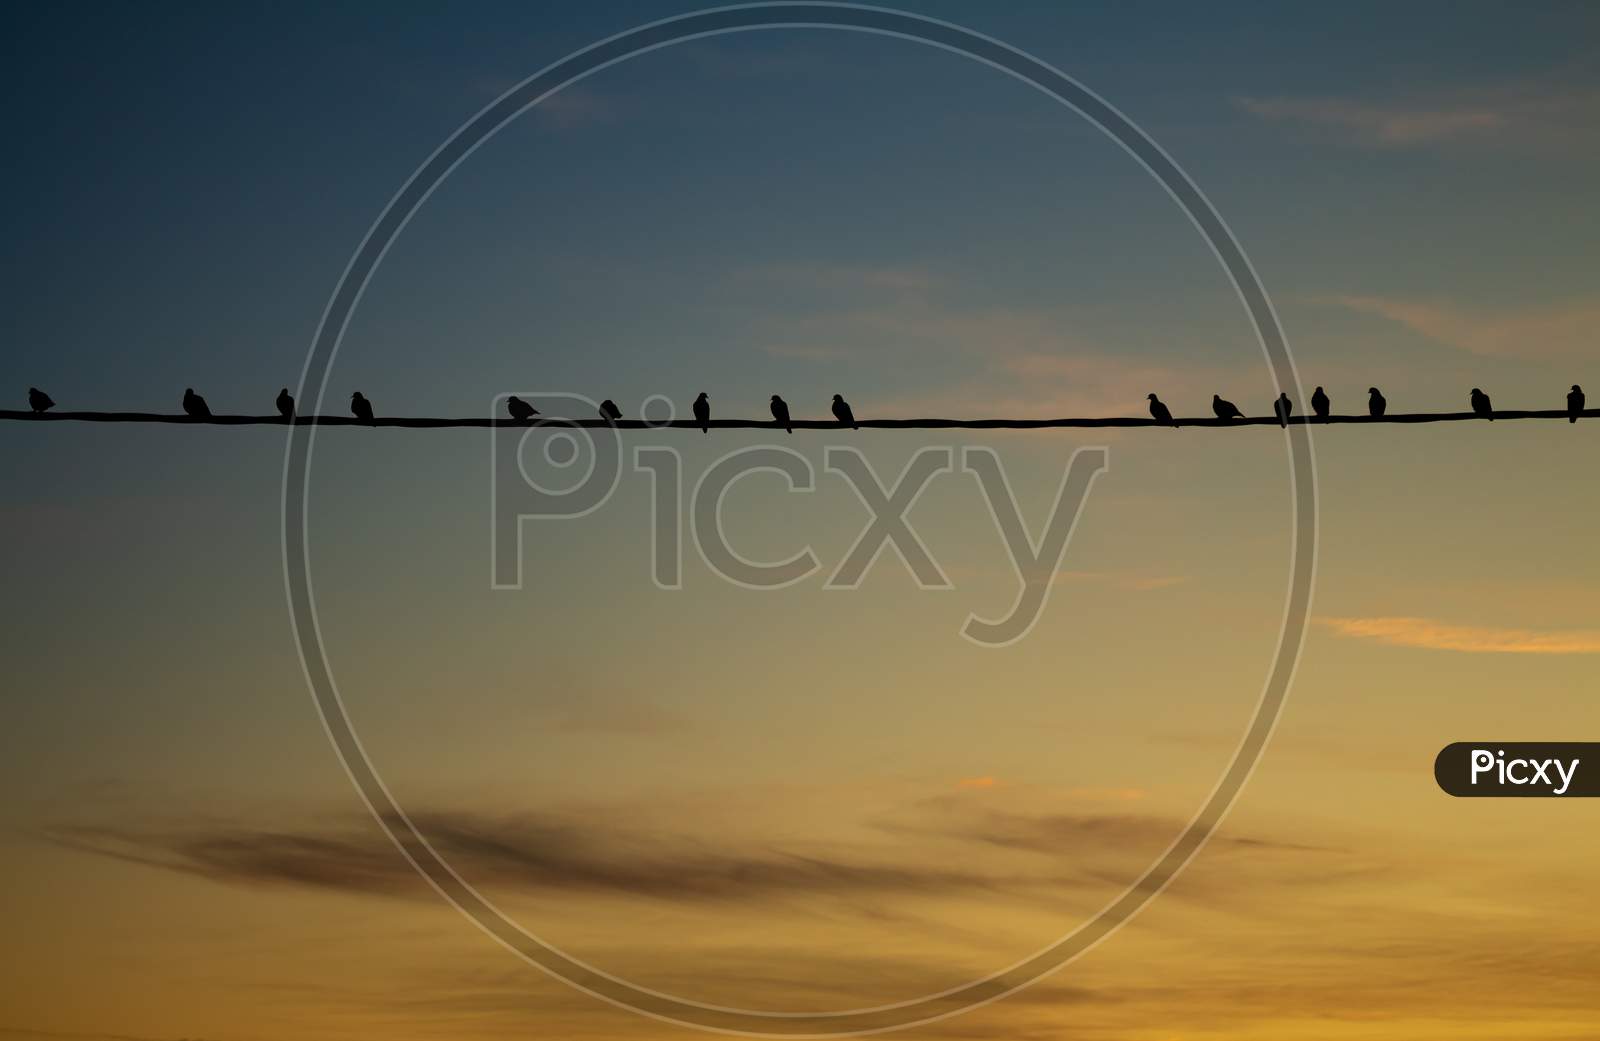 Small Birds On A Wire During Sunset. Sky With Isolated Clouds